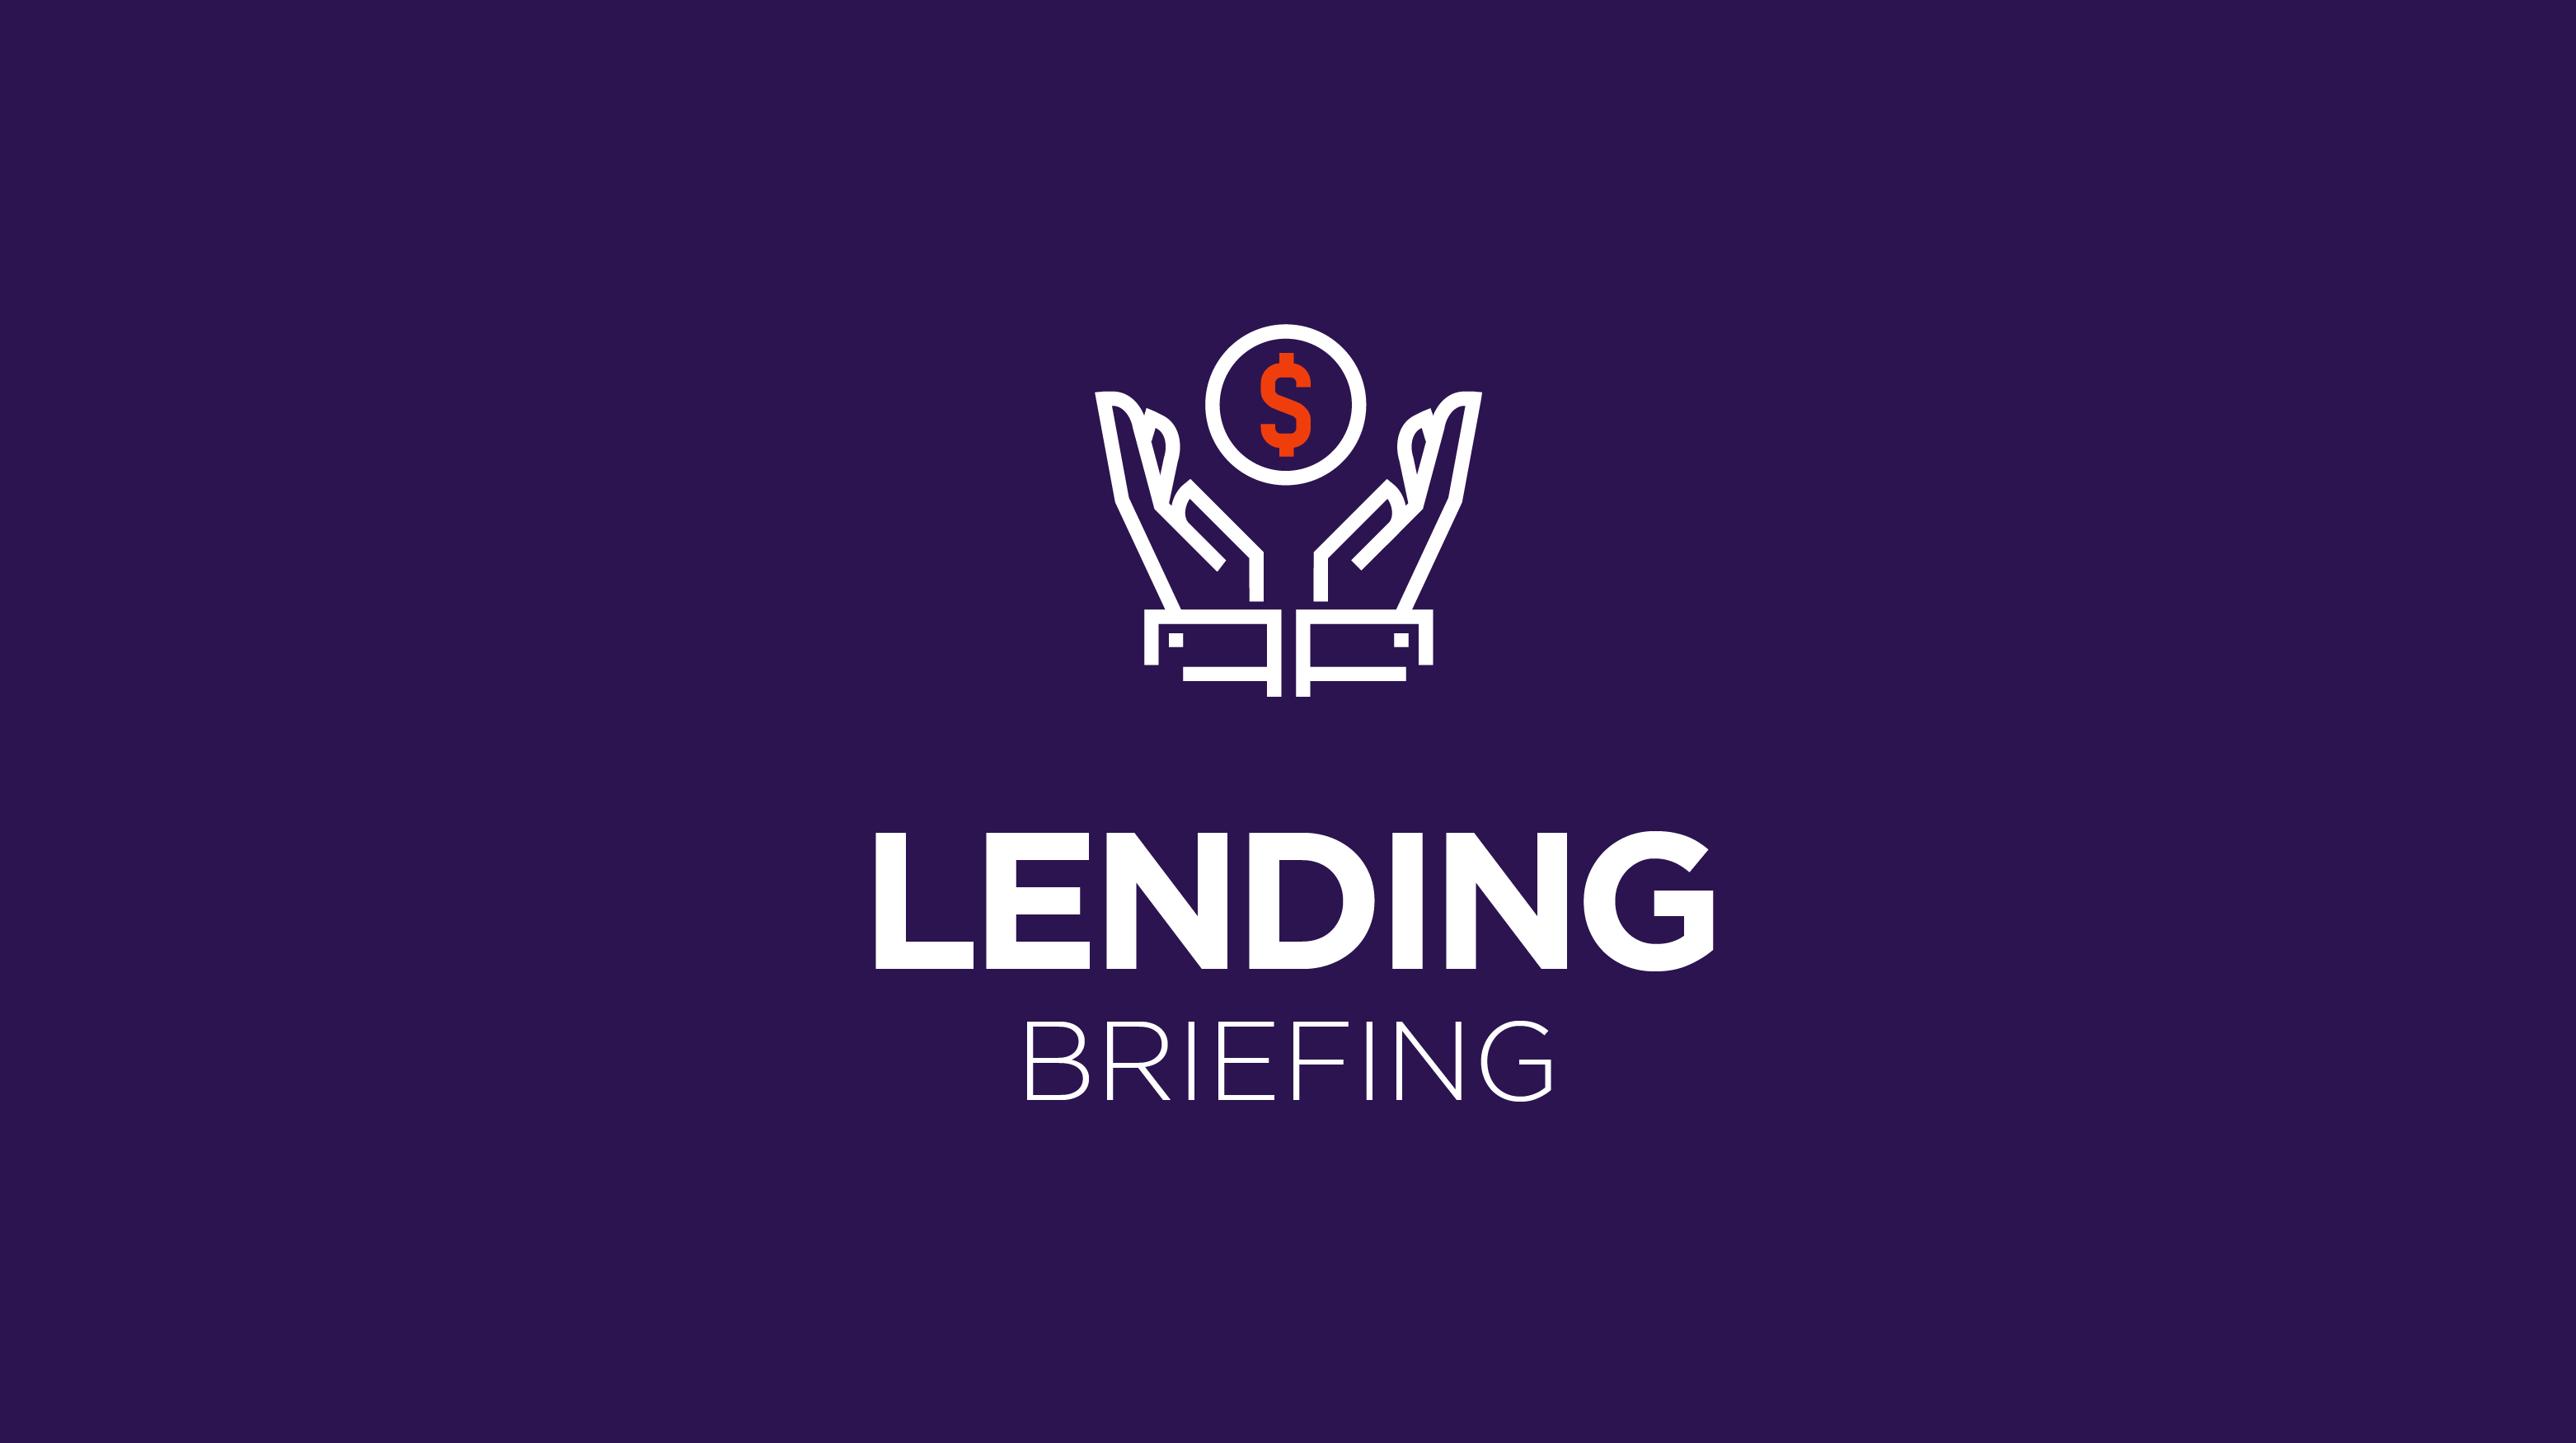 Lending Briefing: The SMB Brexit, and digital lending VC funding